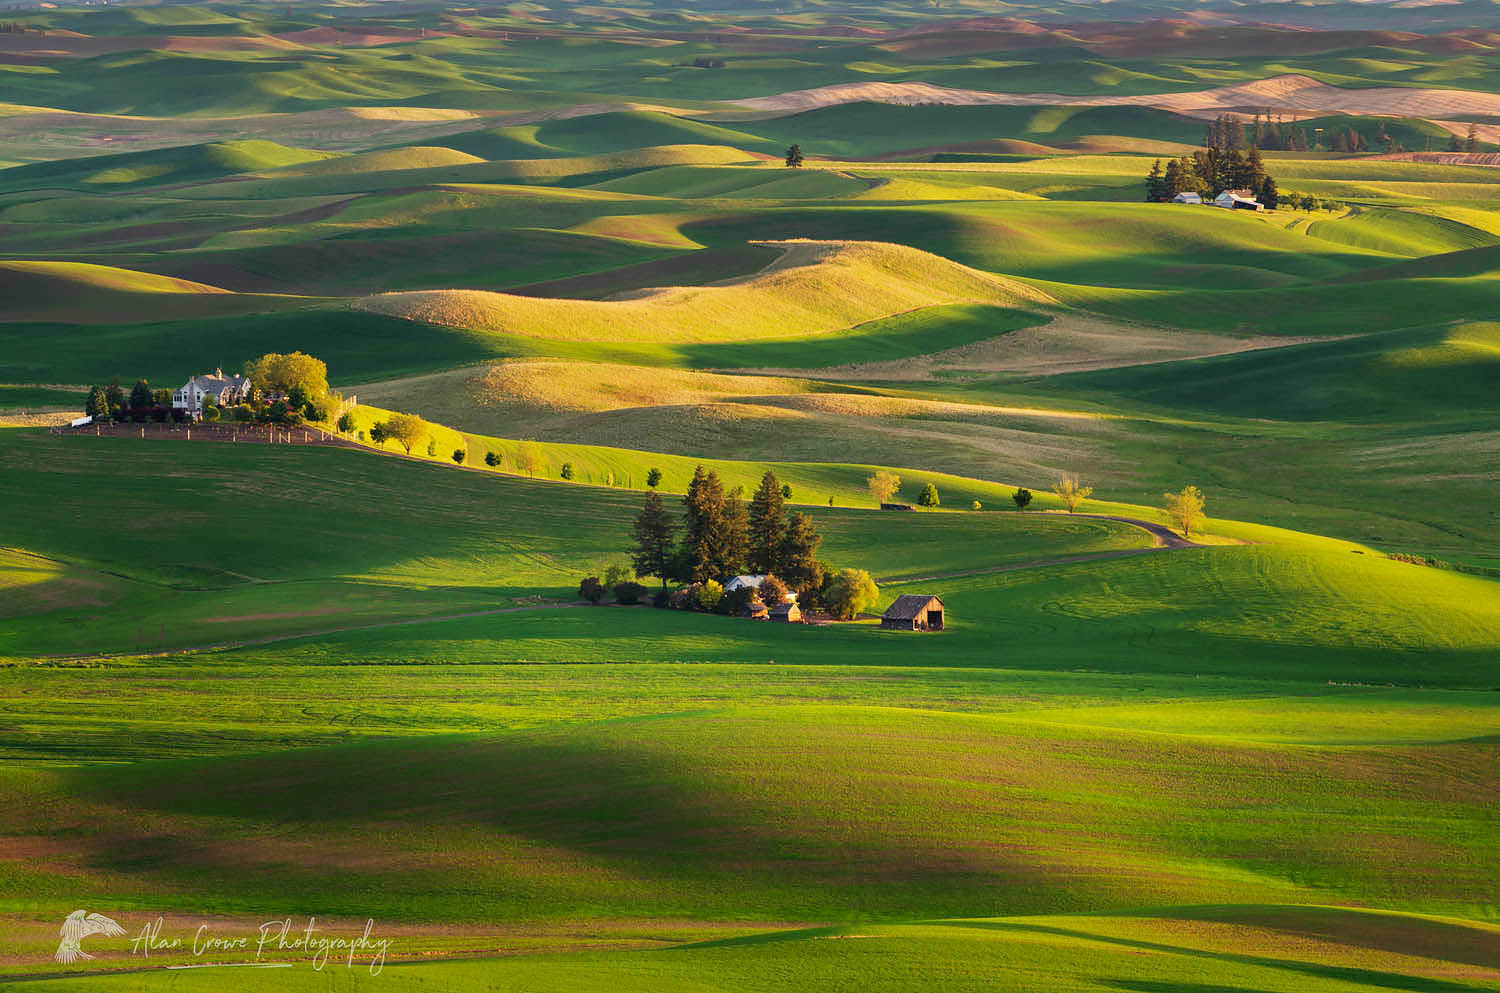 Farms set amidst the rolling hills of green wheat fields in the Palouse region of the Inland Empire of Washington #51760